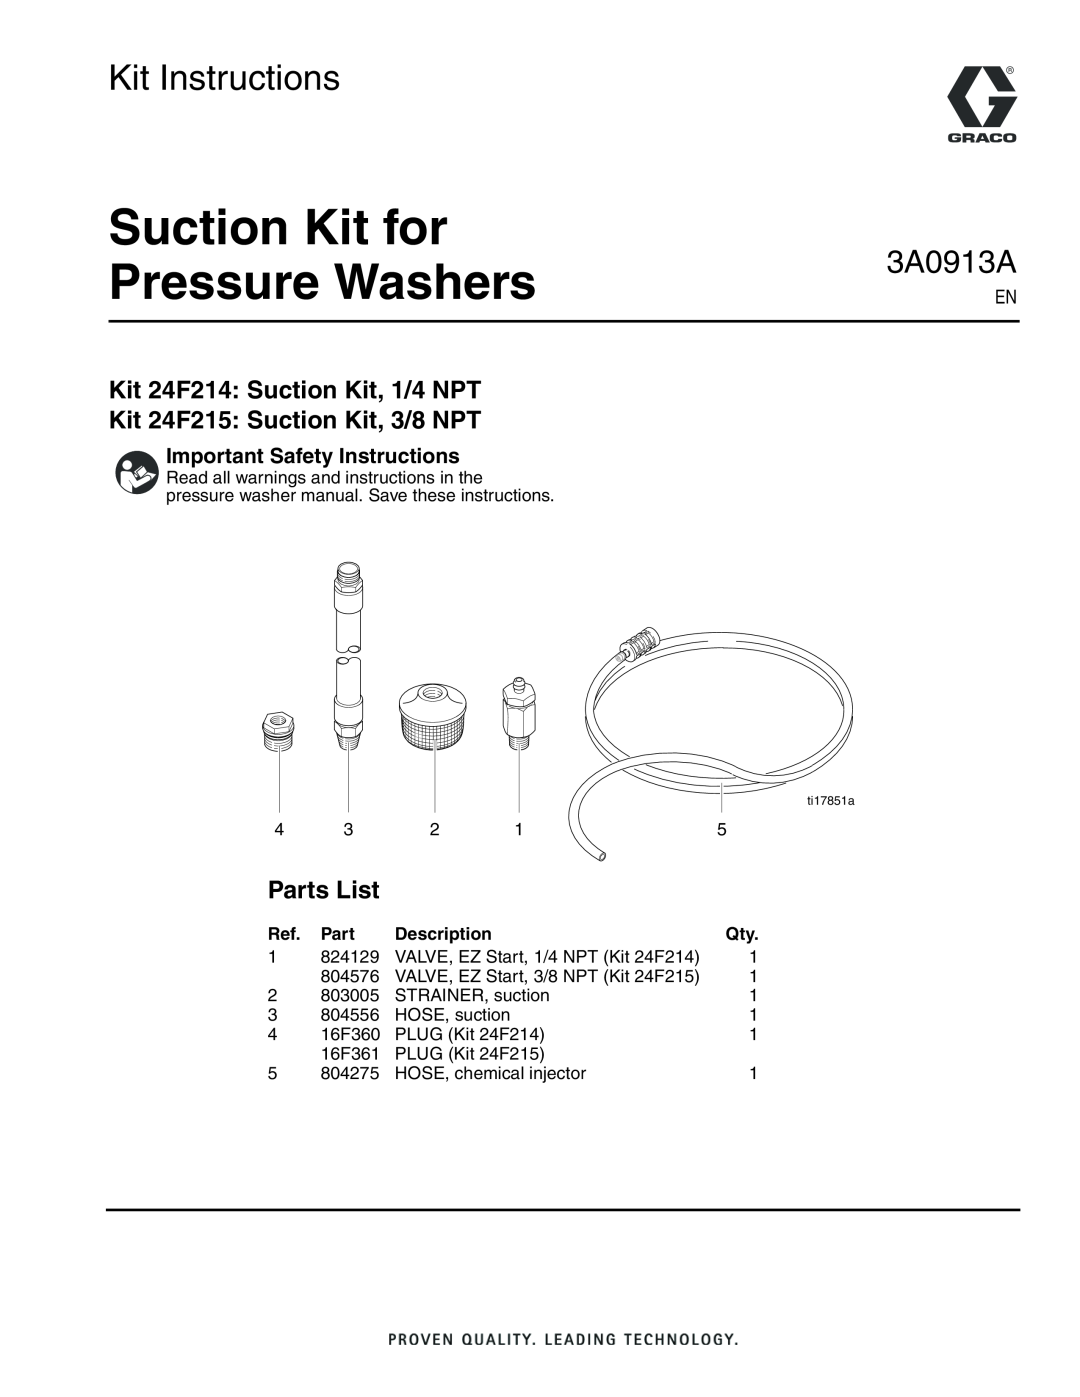 Graco important safety instructions Kit 24F214 Suction Kit, 1/4 NPT Kit 24F215 Suction Kit, 3/8 NPT, Parts List 